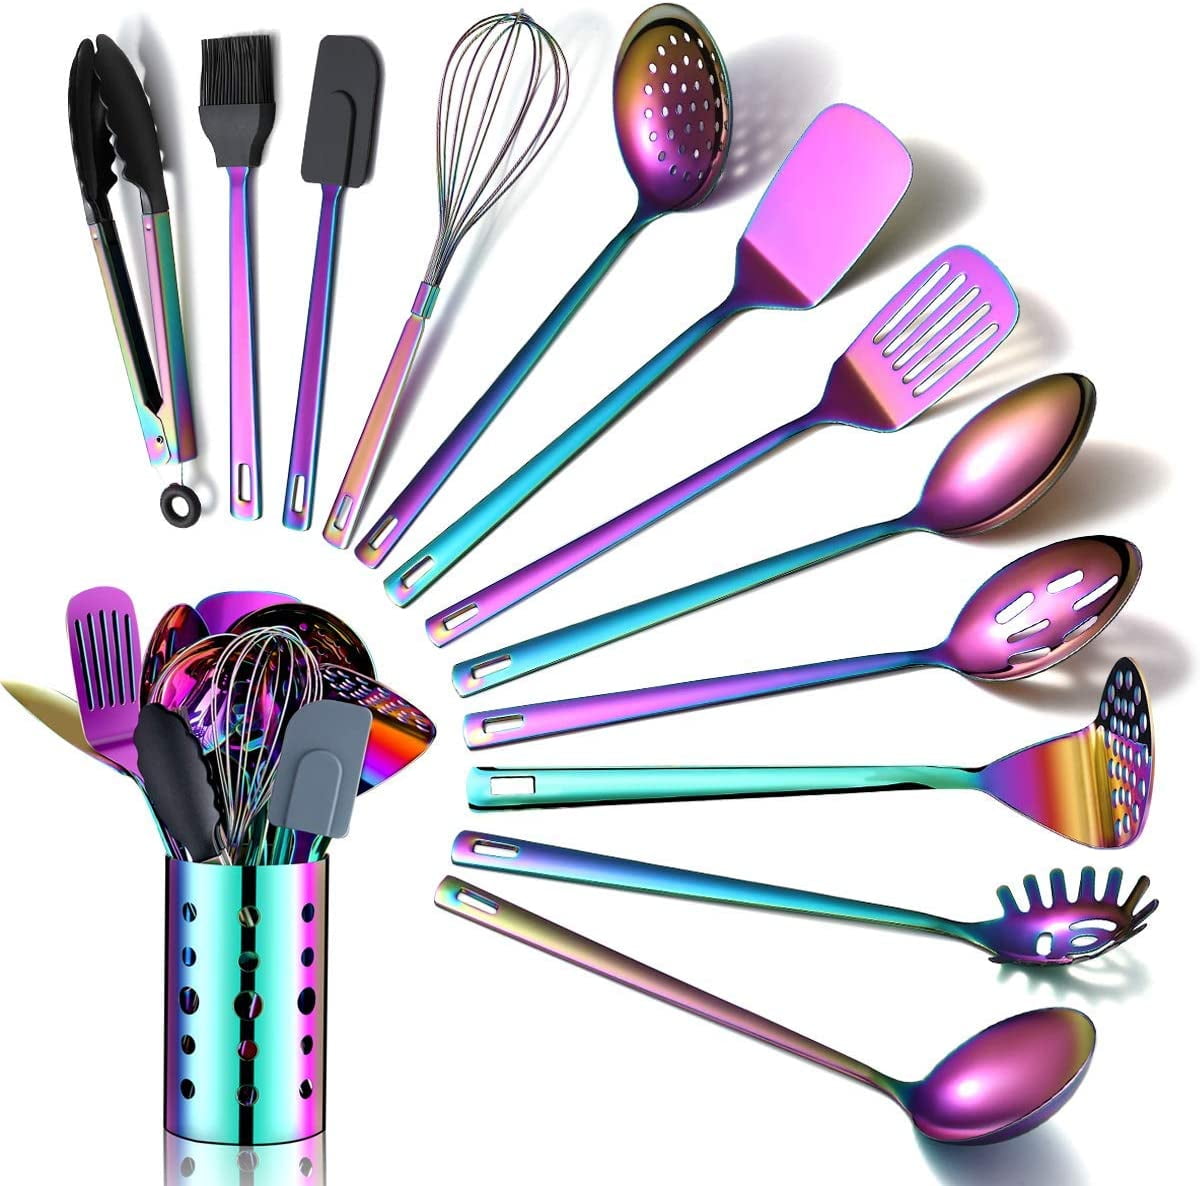 Just Houseware Rainbow Kitchen Utensils Set 13 Piece Stainless Steel Cooking Cookware Set With Utensil Holder For Non Stick F3ec4a0b Daab 4ed1 B45b Ddfa5f0b2455.f2f4fa1b565bbbc918c71424f2970387 